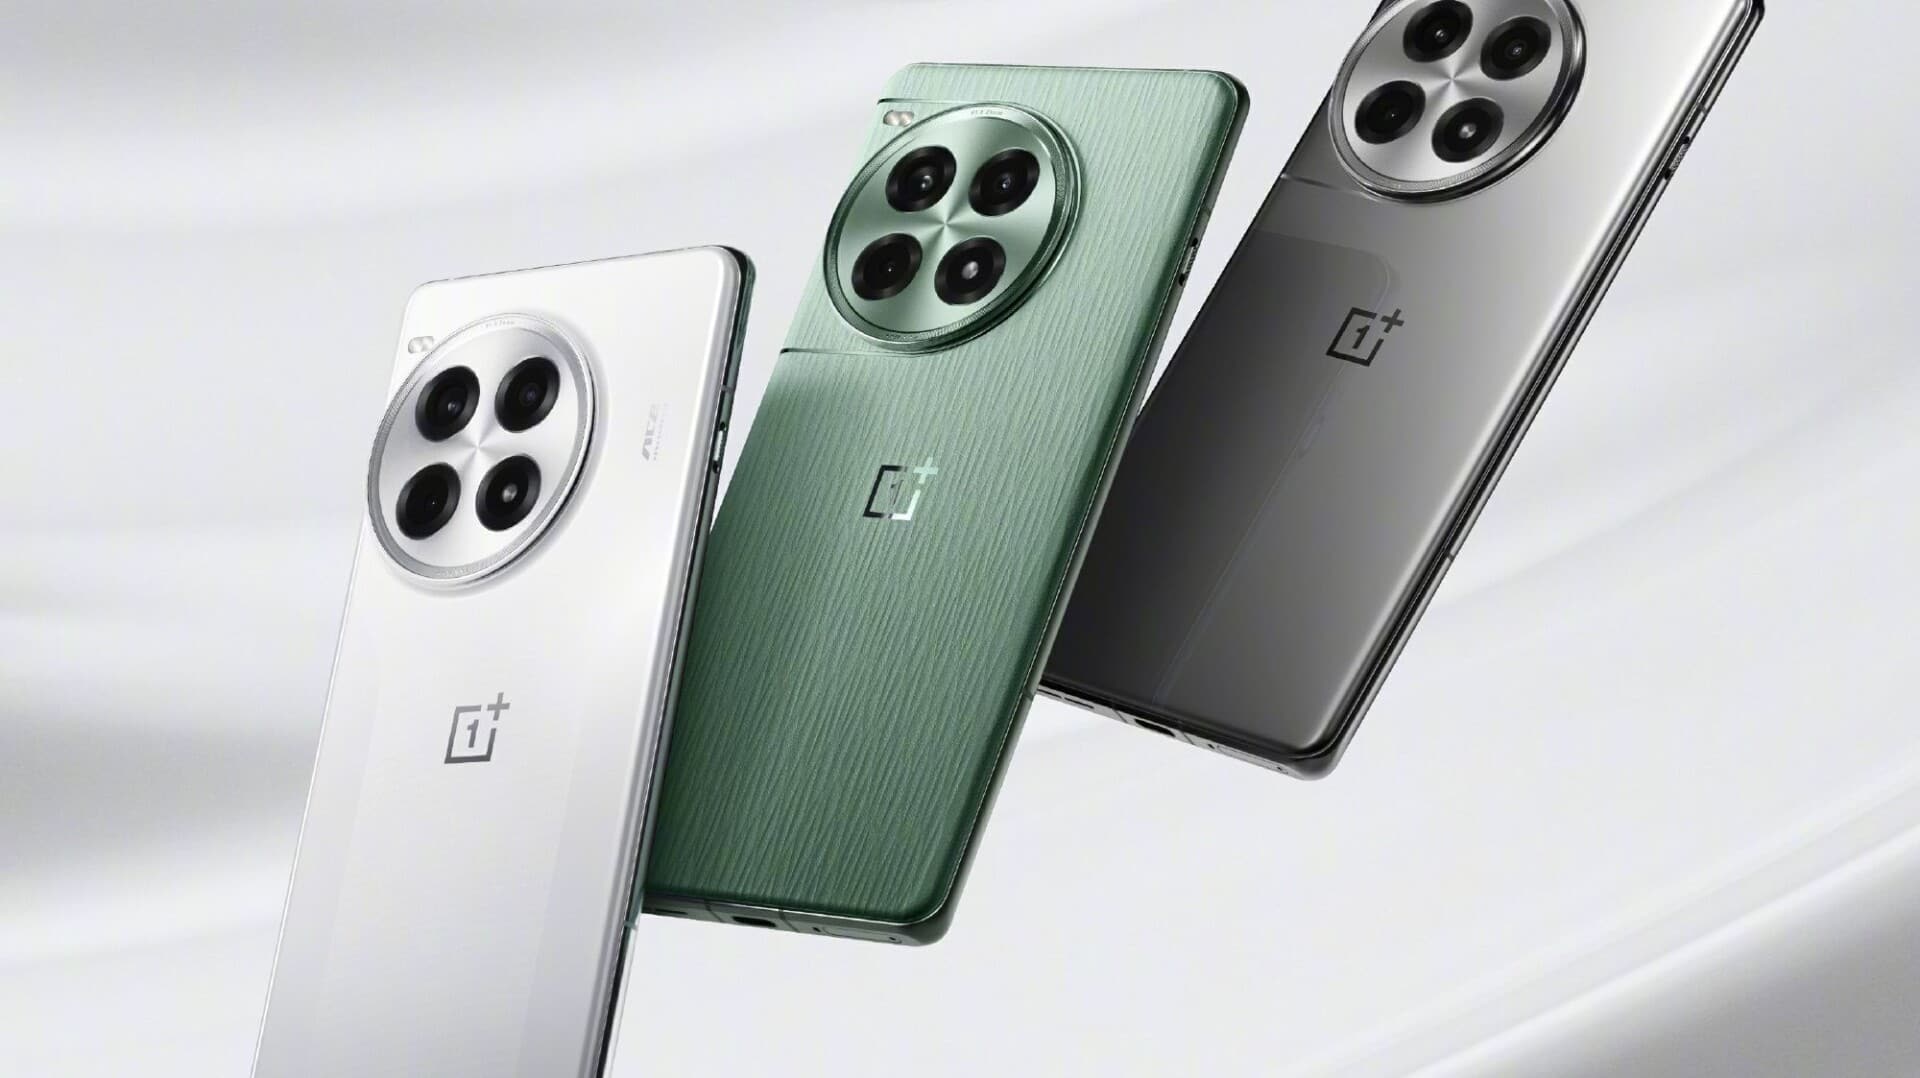 OnePlus Ace 3 Pro color variants revealed ahead of launch